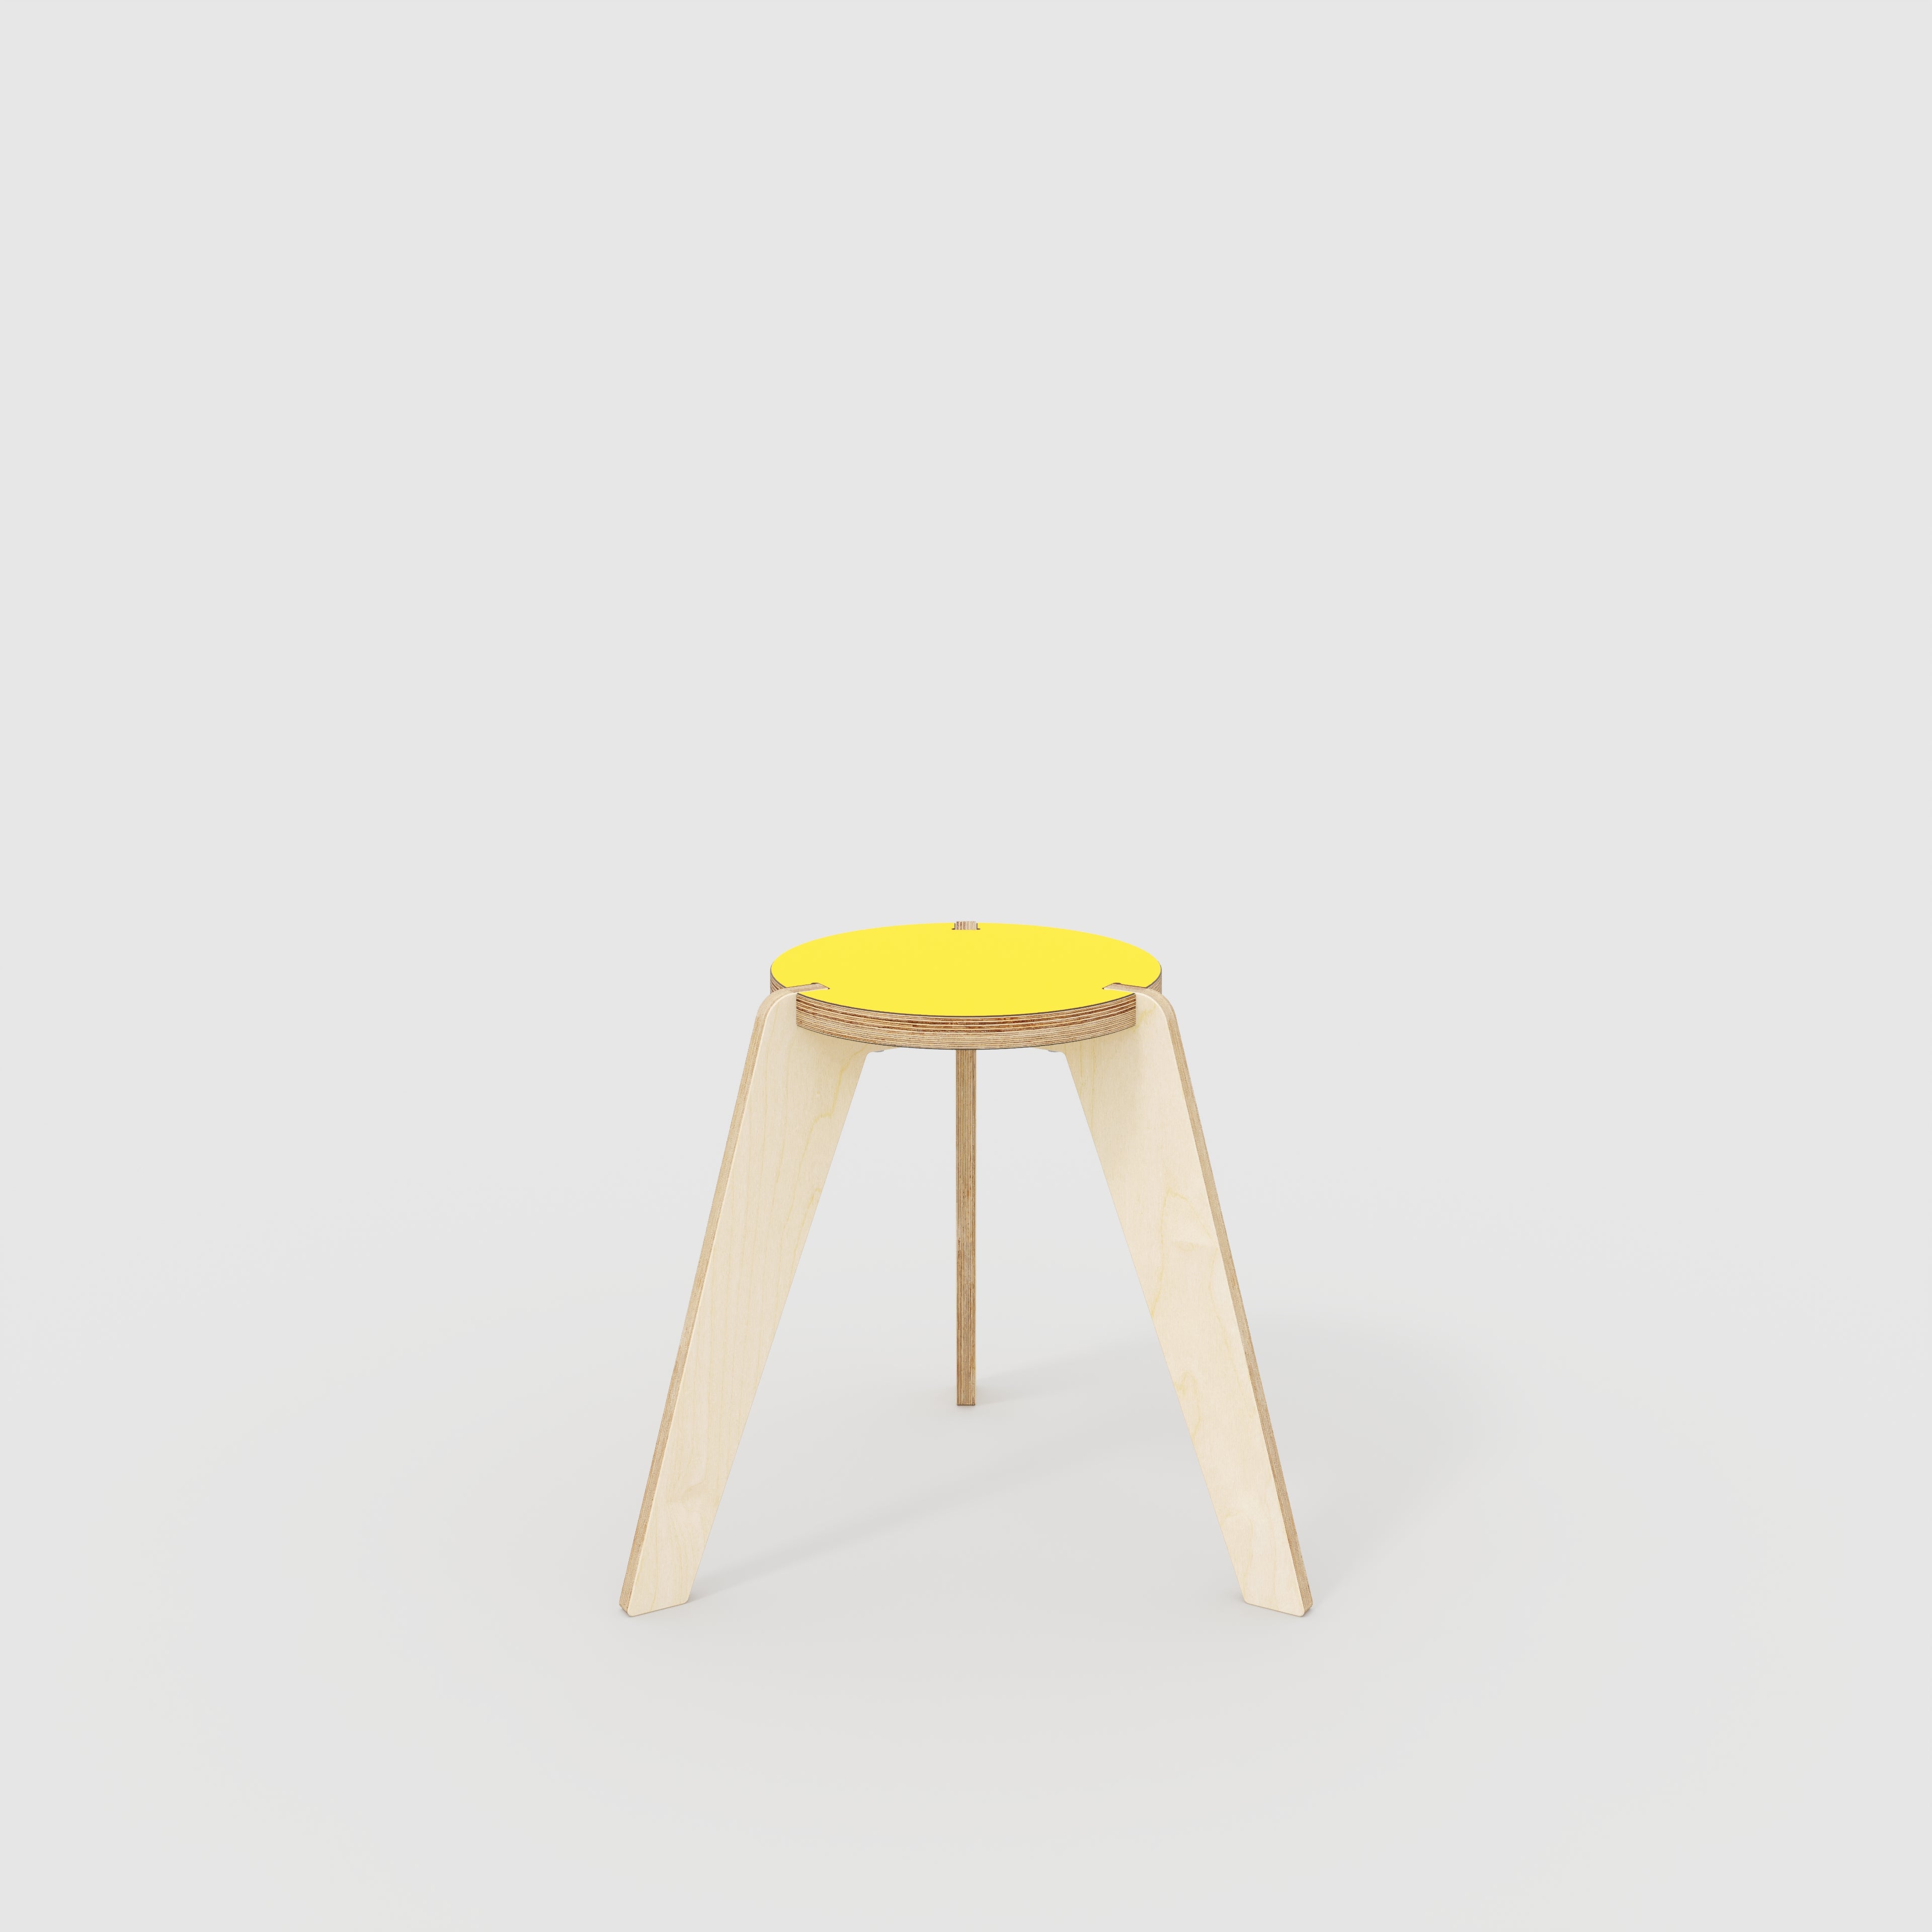 Round Stool with Plywood Legs - Formica Chrome Yellow - 525(w) x 450(d) x 450(h)